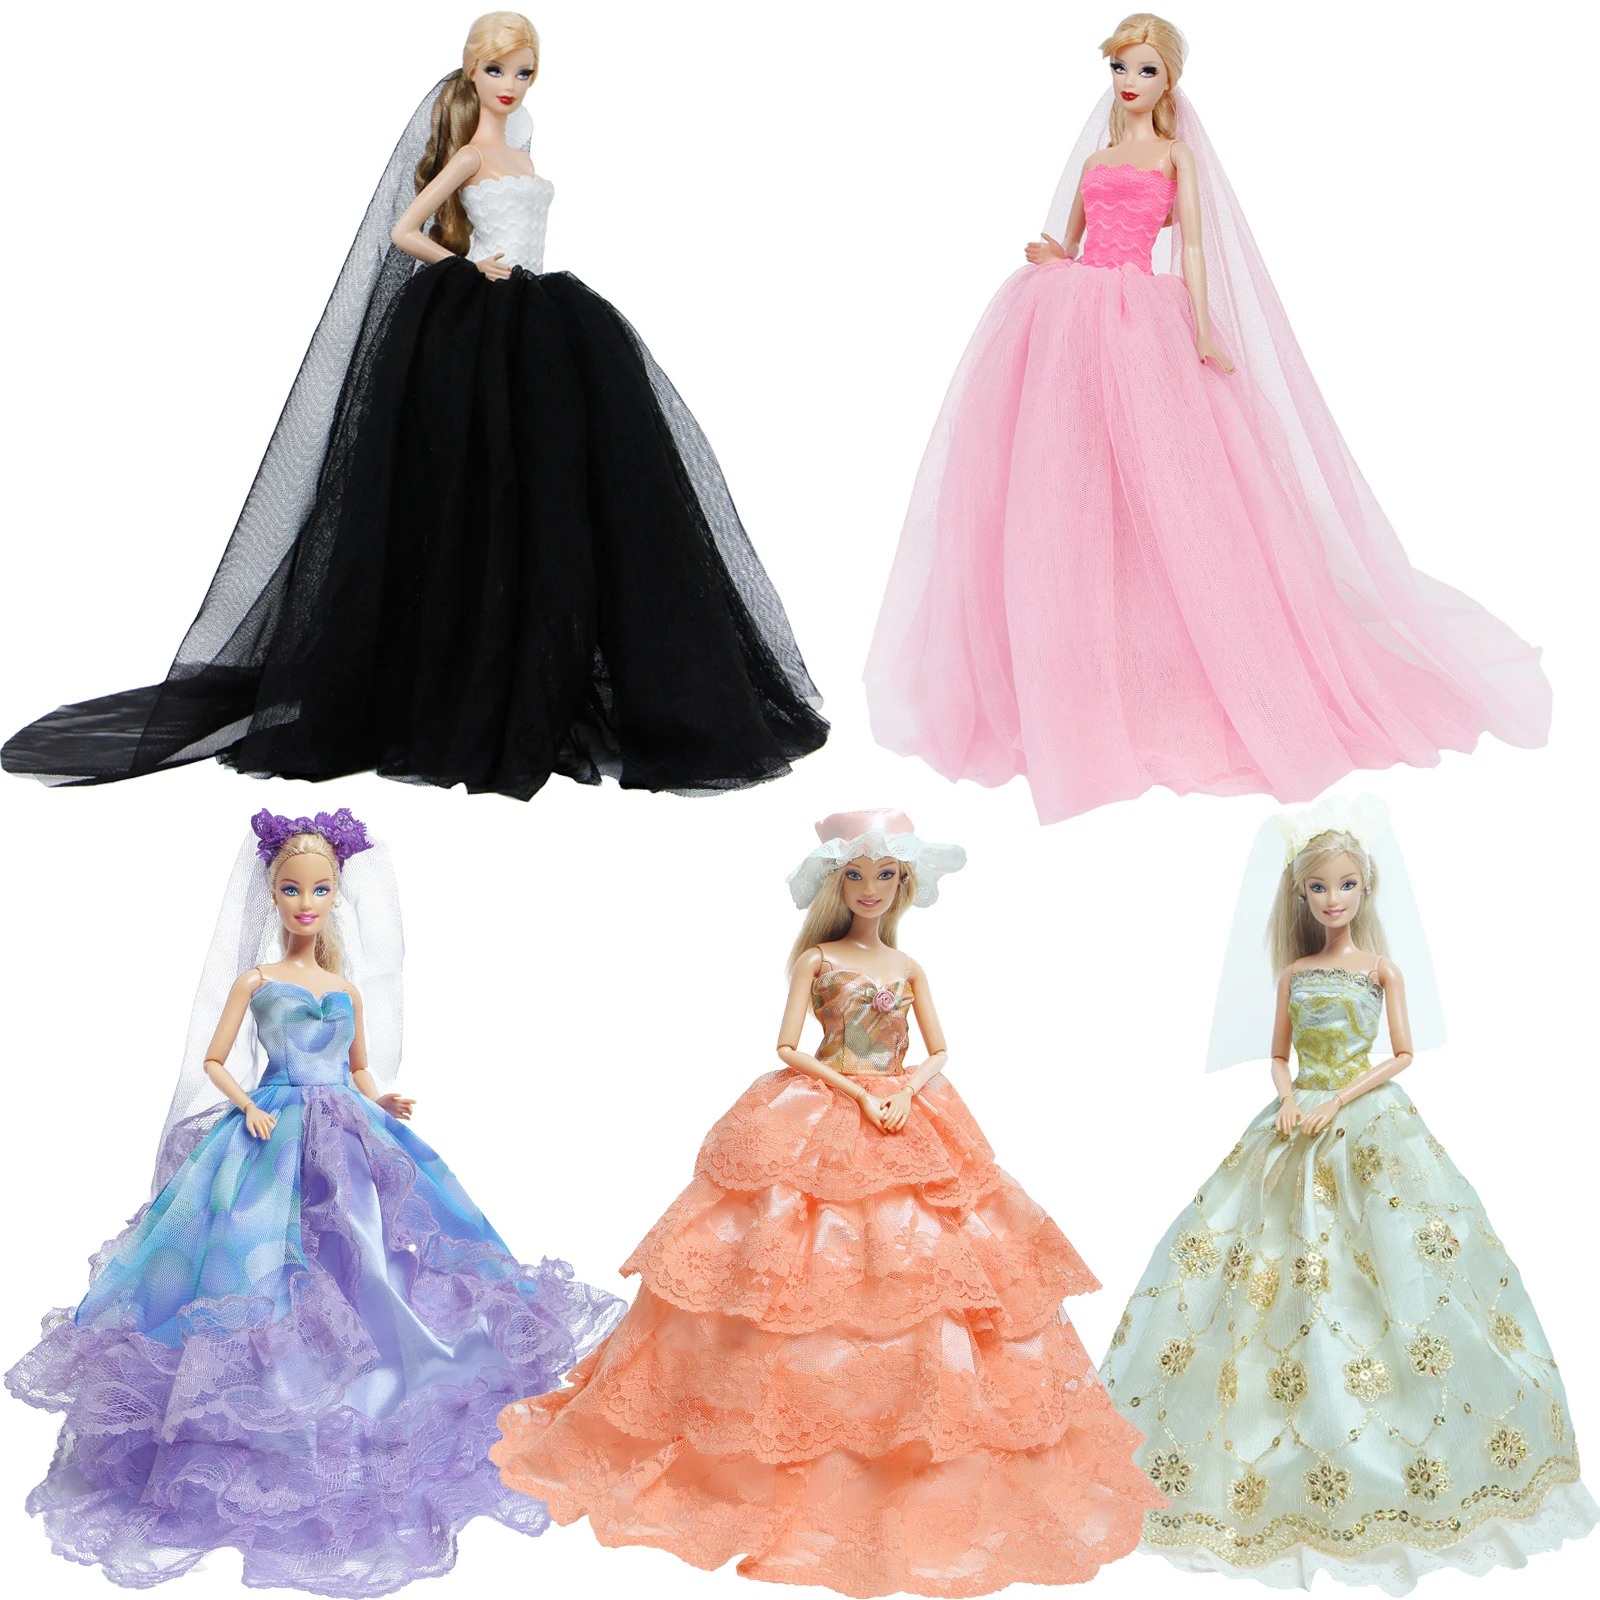 Fashion Royalty Princess Dress/Clothes/Gown+Hat For 11.5in.Doll S544 